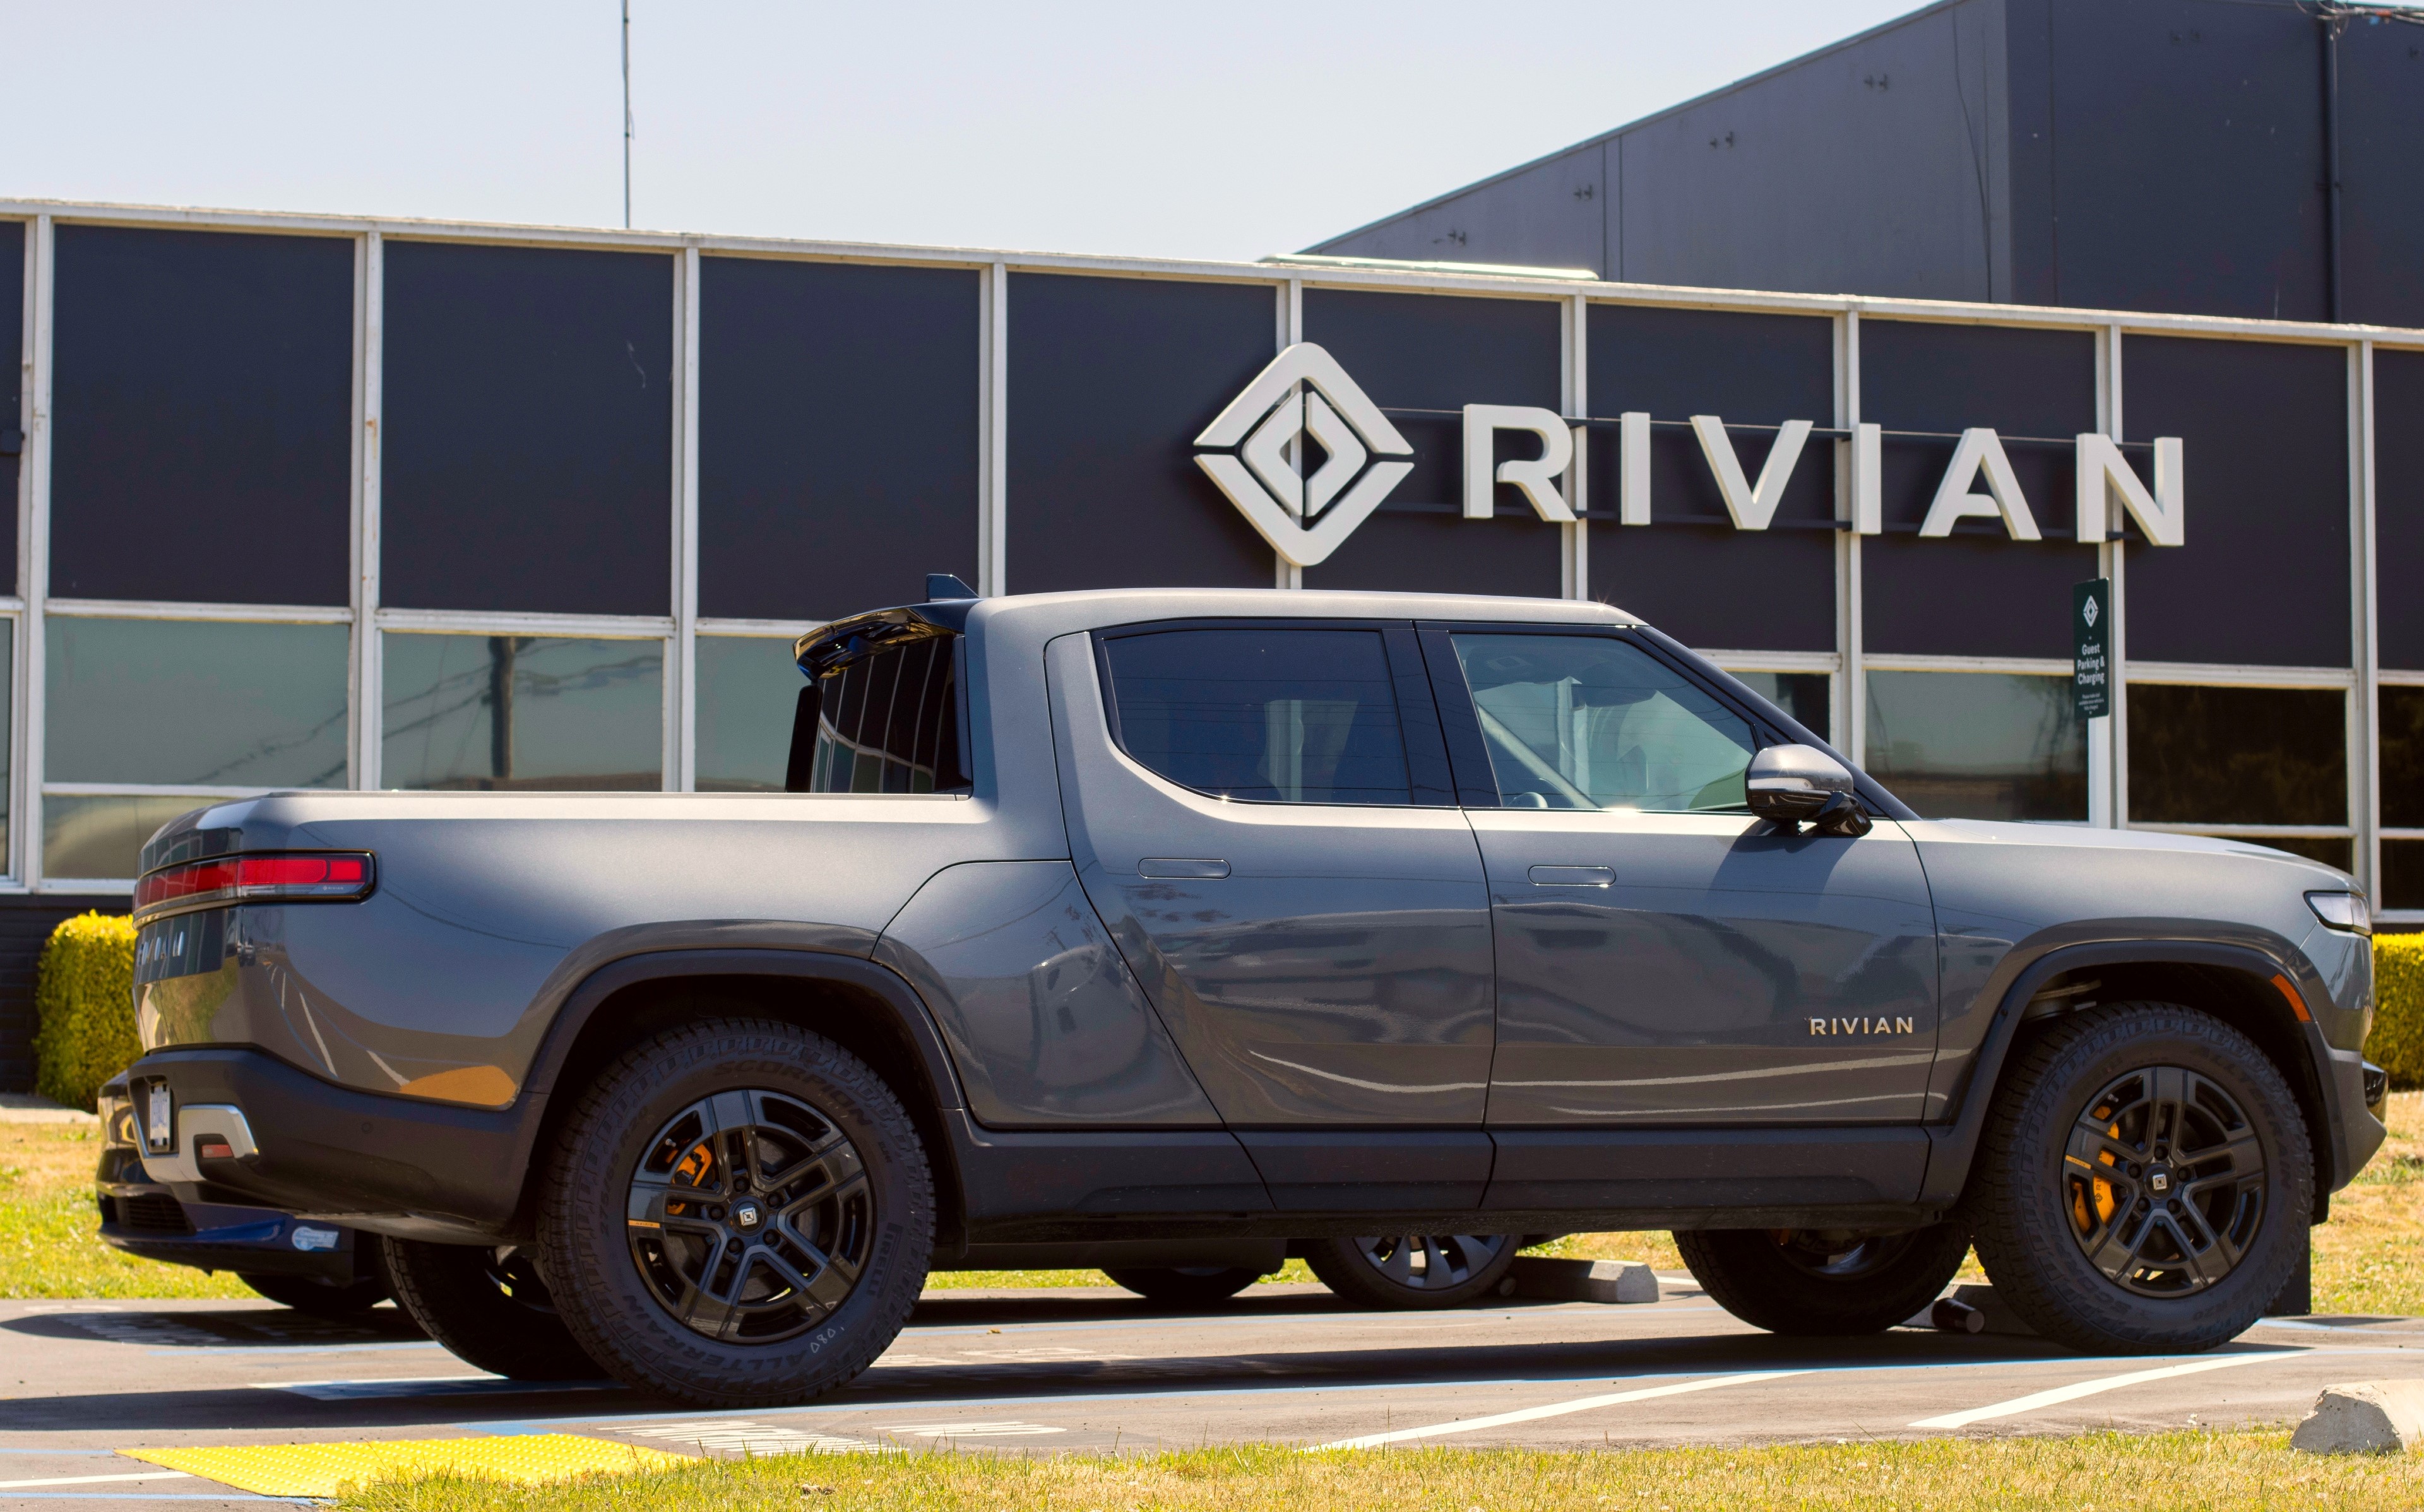 Rivian stock is in recovery mode: How high can it go?